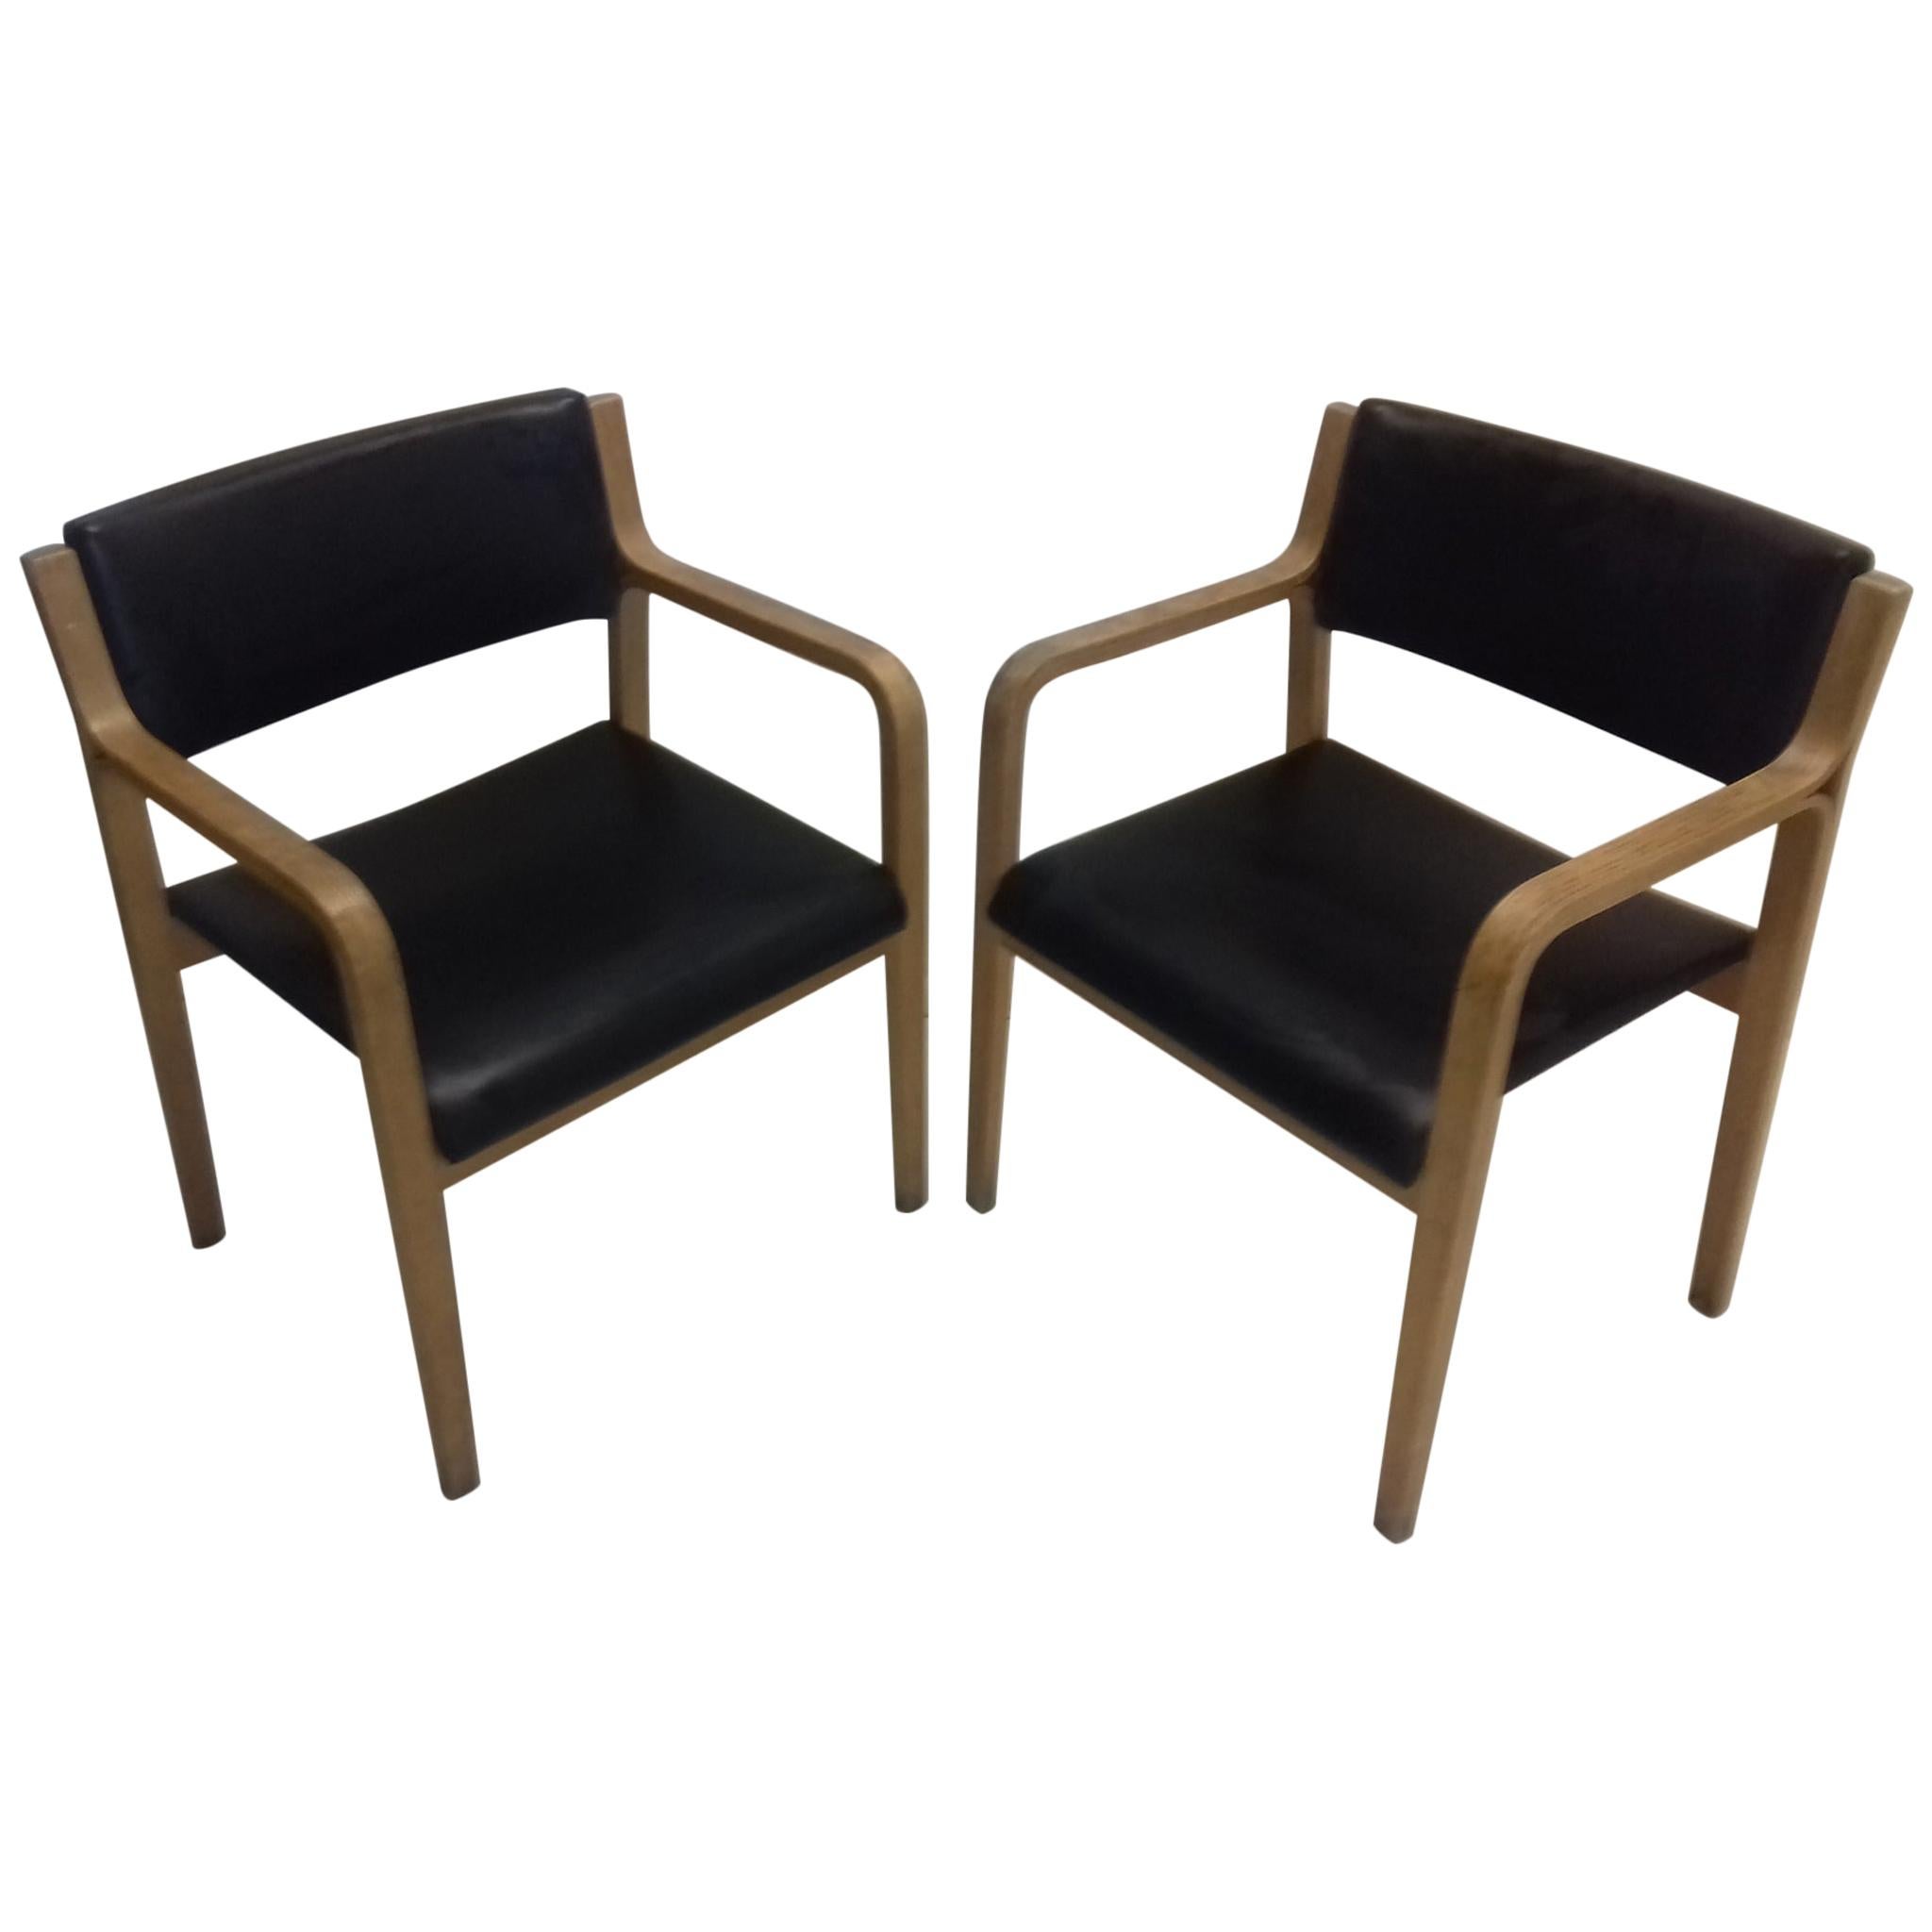 Set of Two Armchairs Designed by Ludvík Volák, 1960s